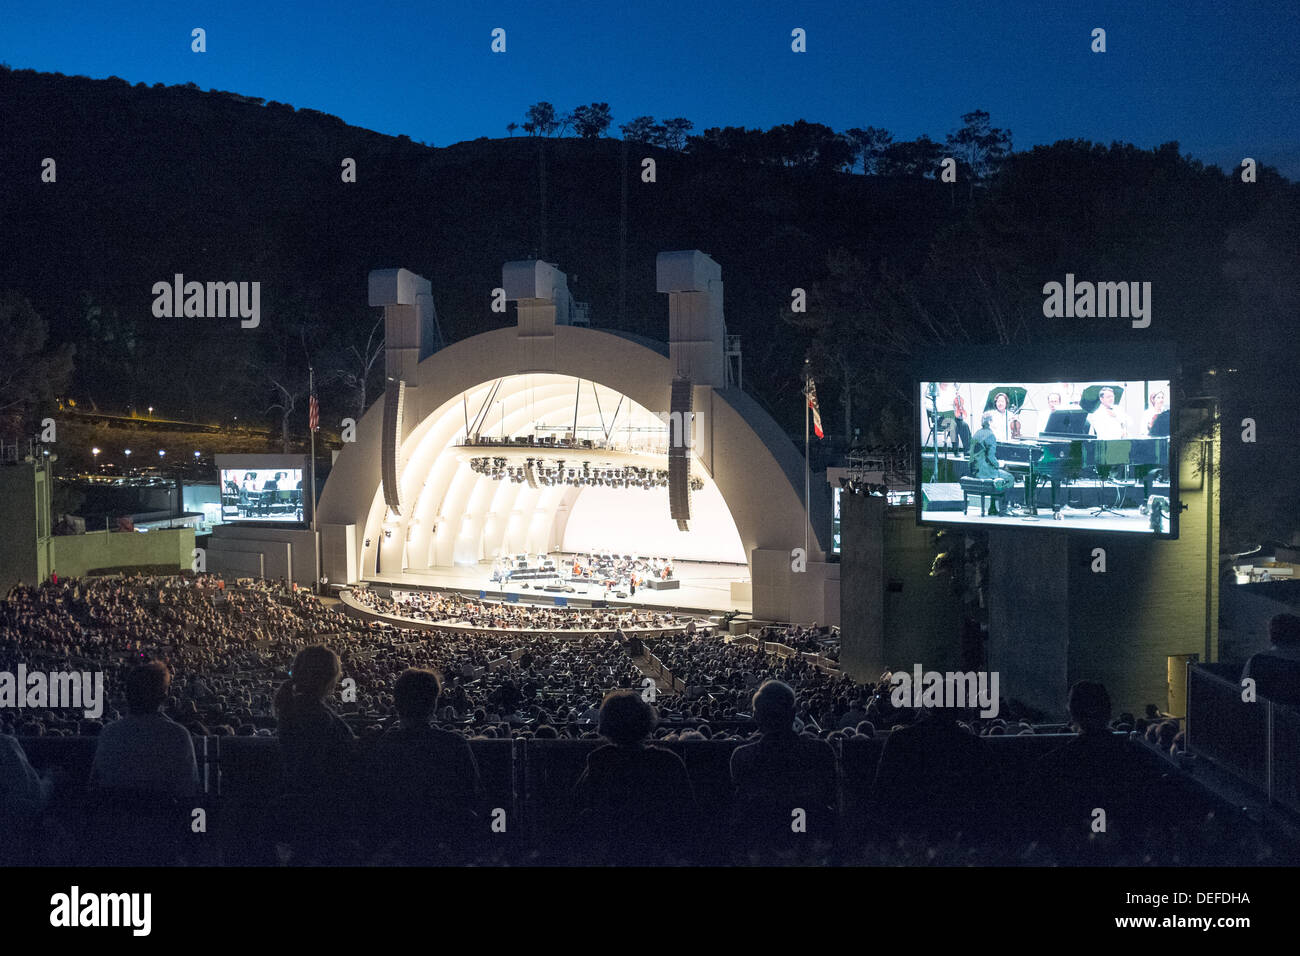 Abend-Sommer-Konzert im Hollywood Bowl in Los Angeles Stockfoto